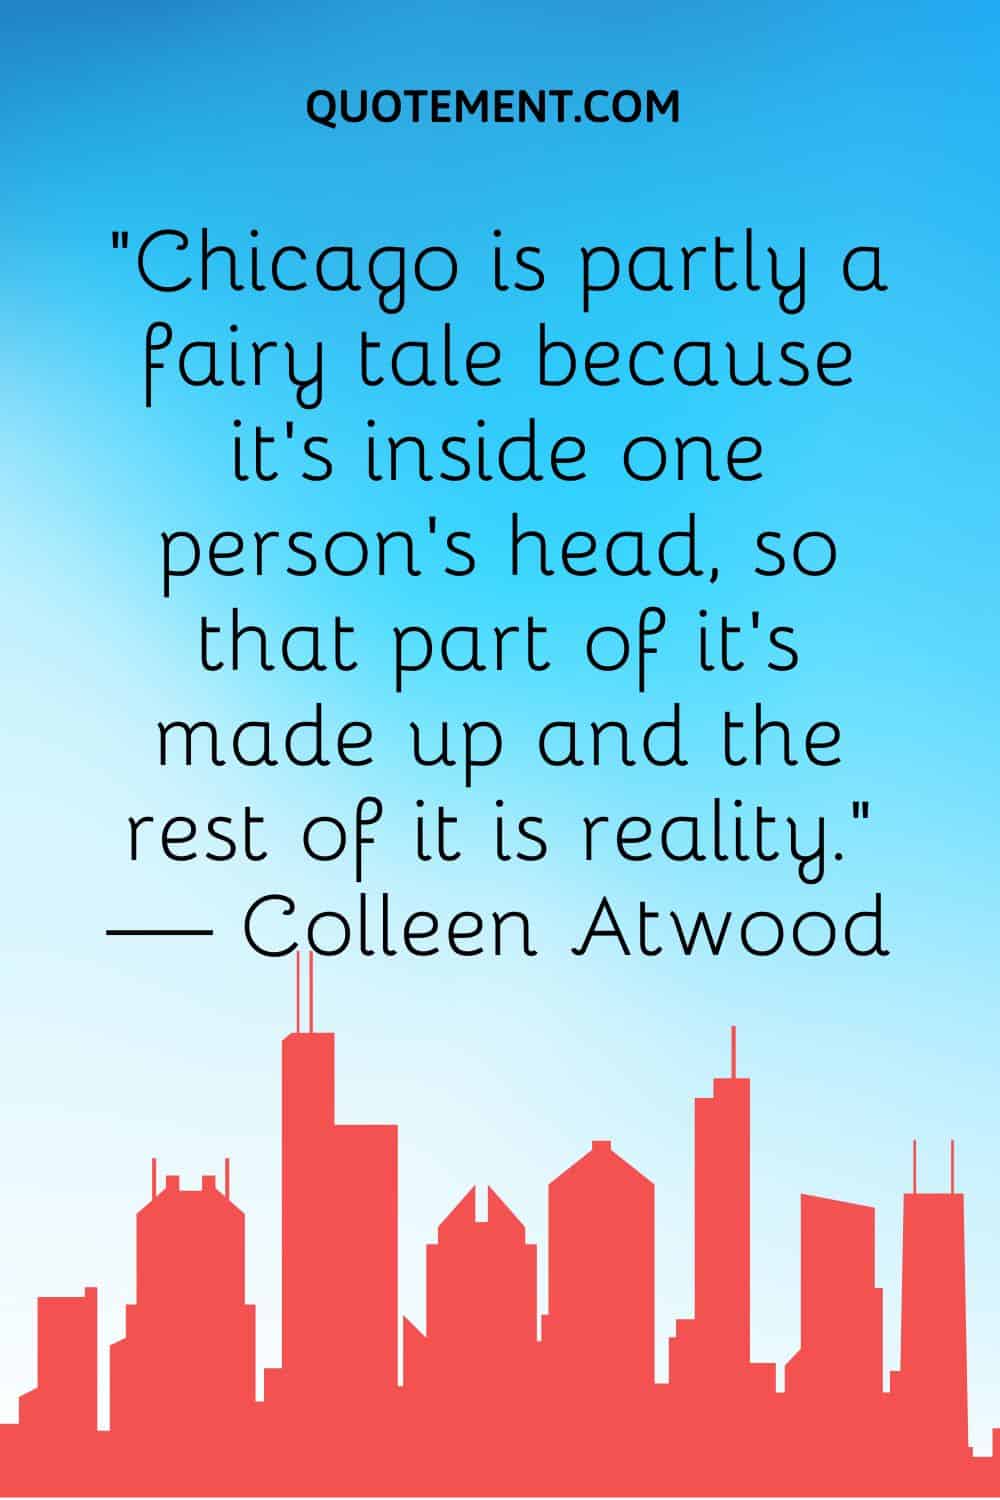 “Chicago is partly a fairy tale because it’s inside one person’s head, so that part of it’s made up and the rest of it is reality.” — Colleen Atwood